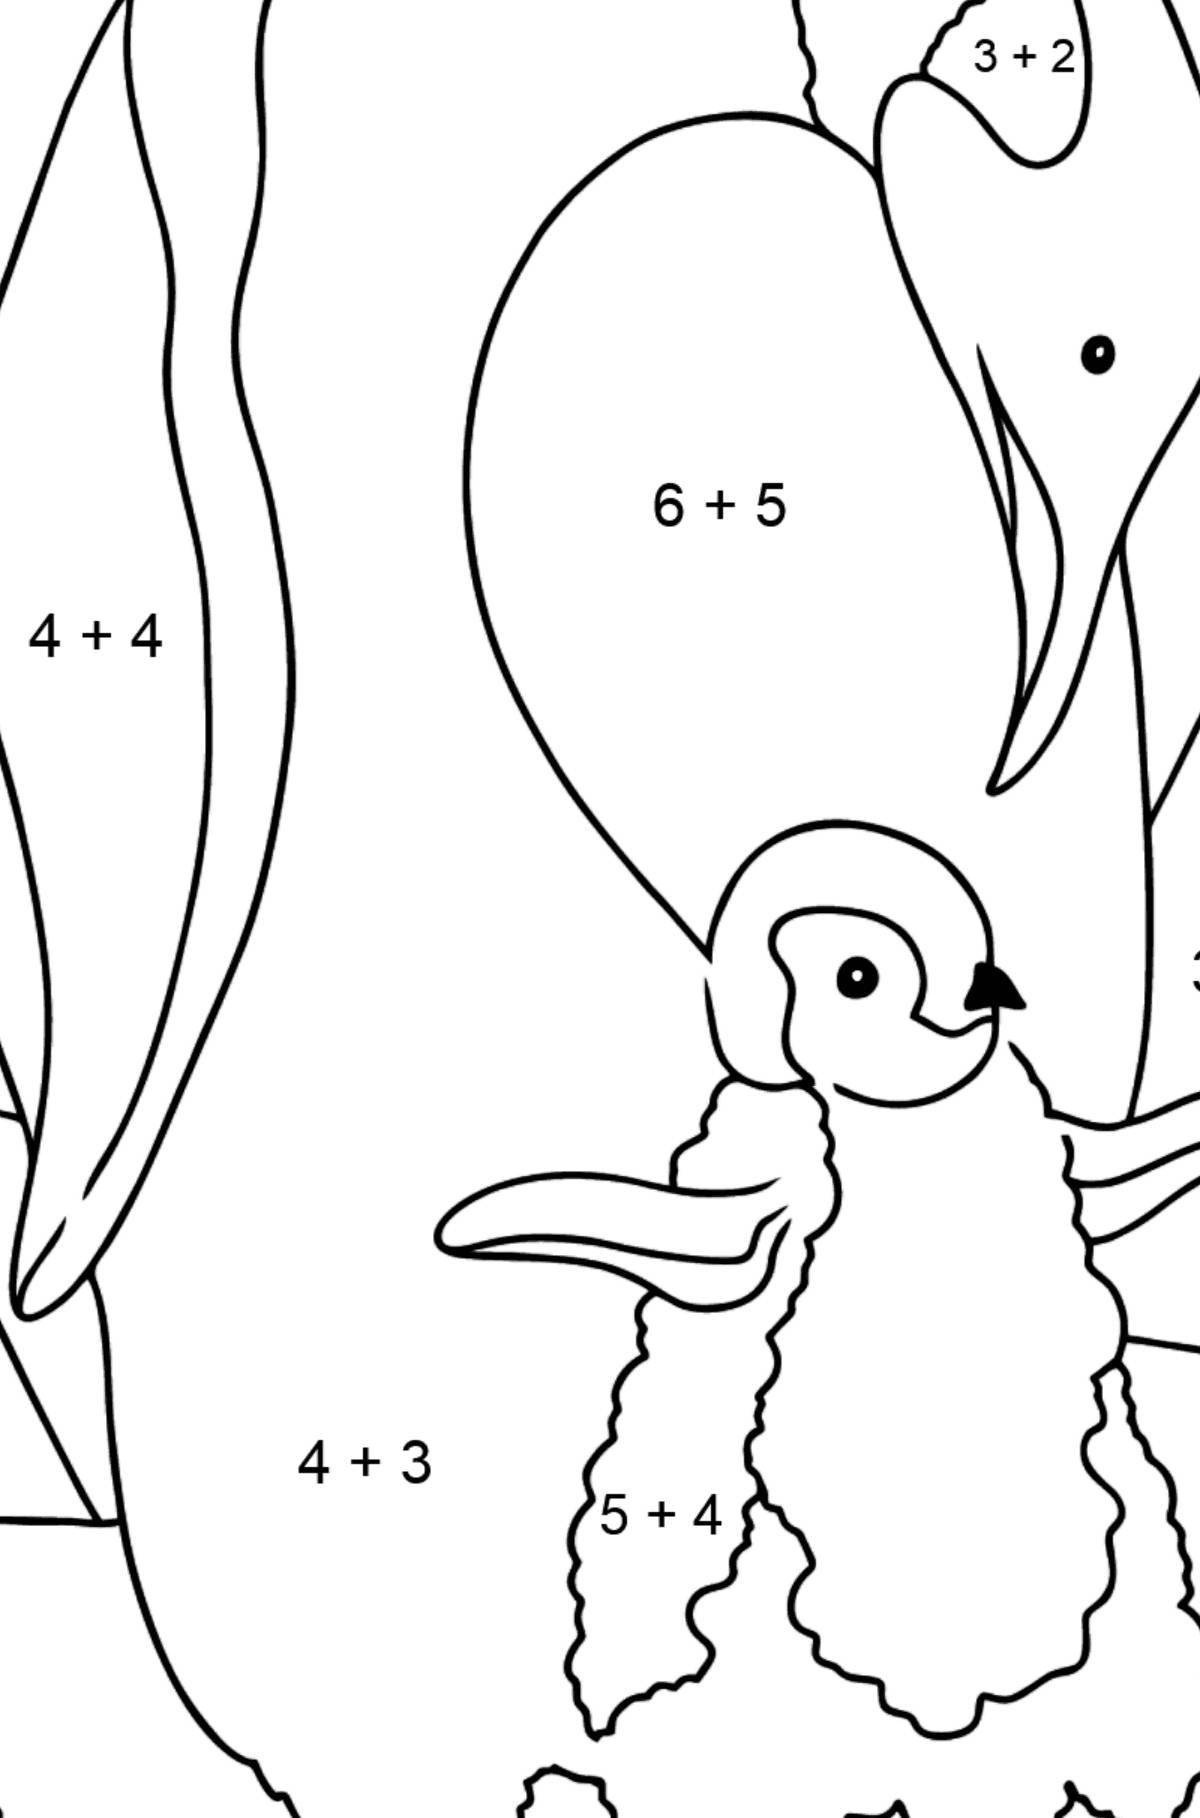 Color penguin by numbers coloring book